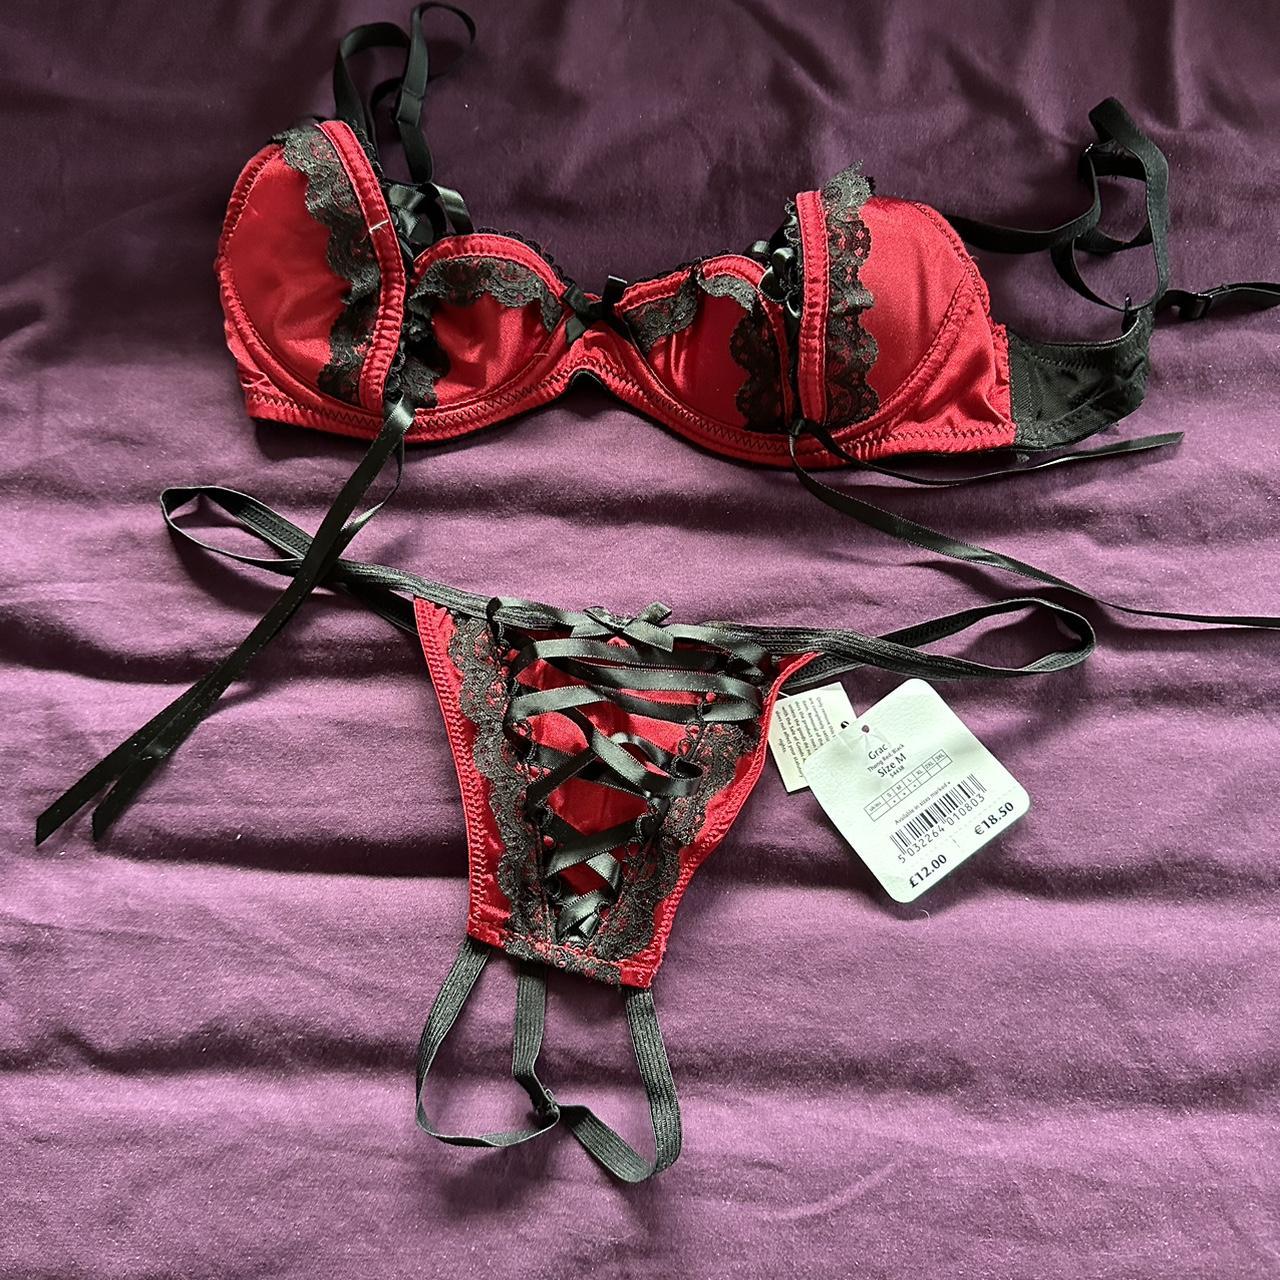 New with tags red & black Ann summers bra and